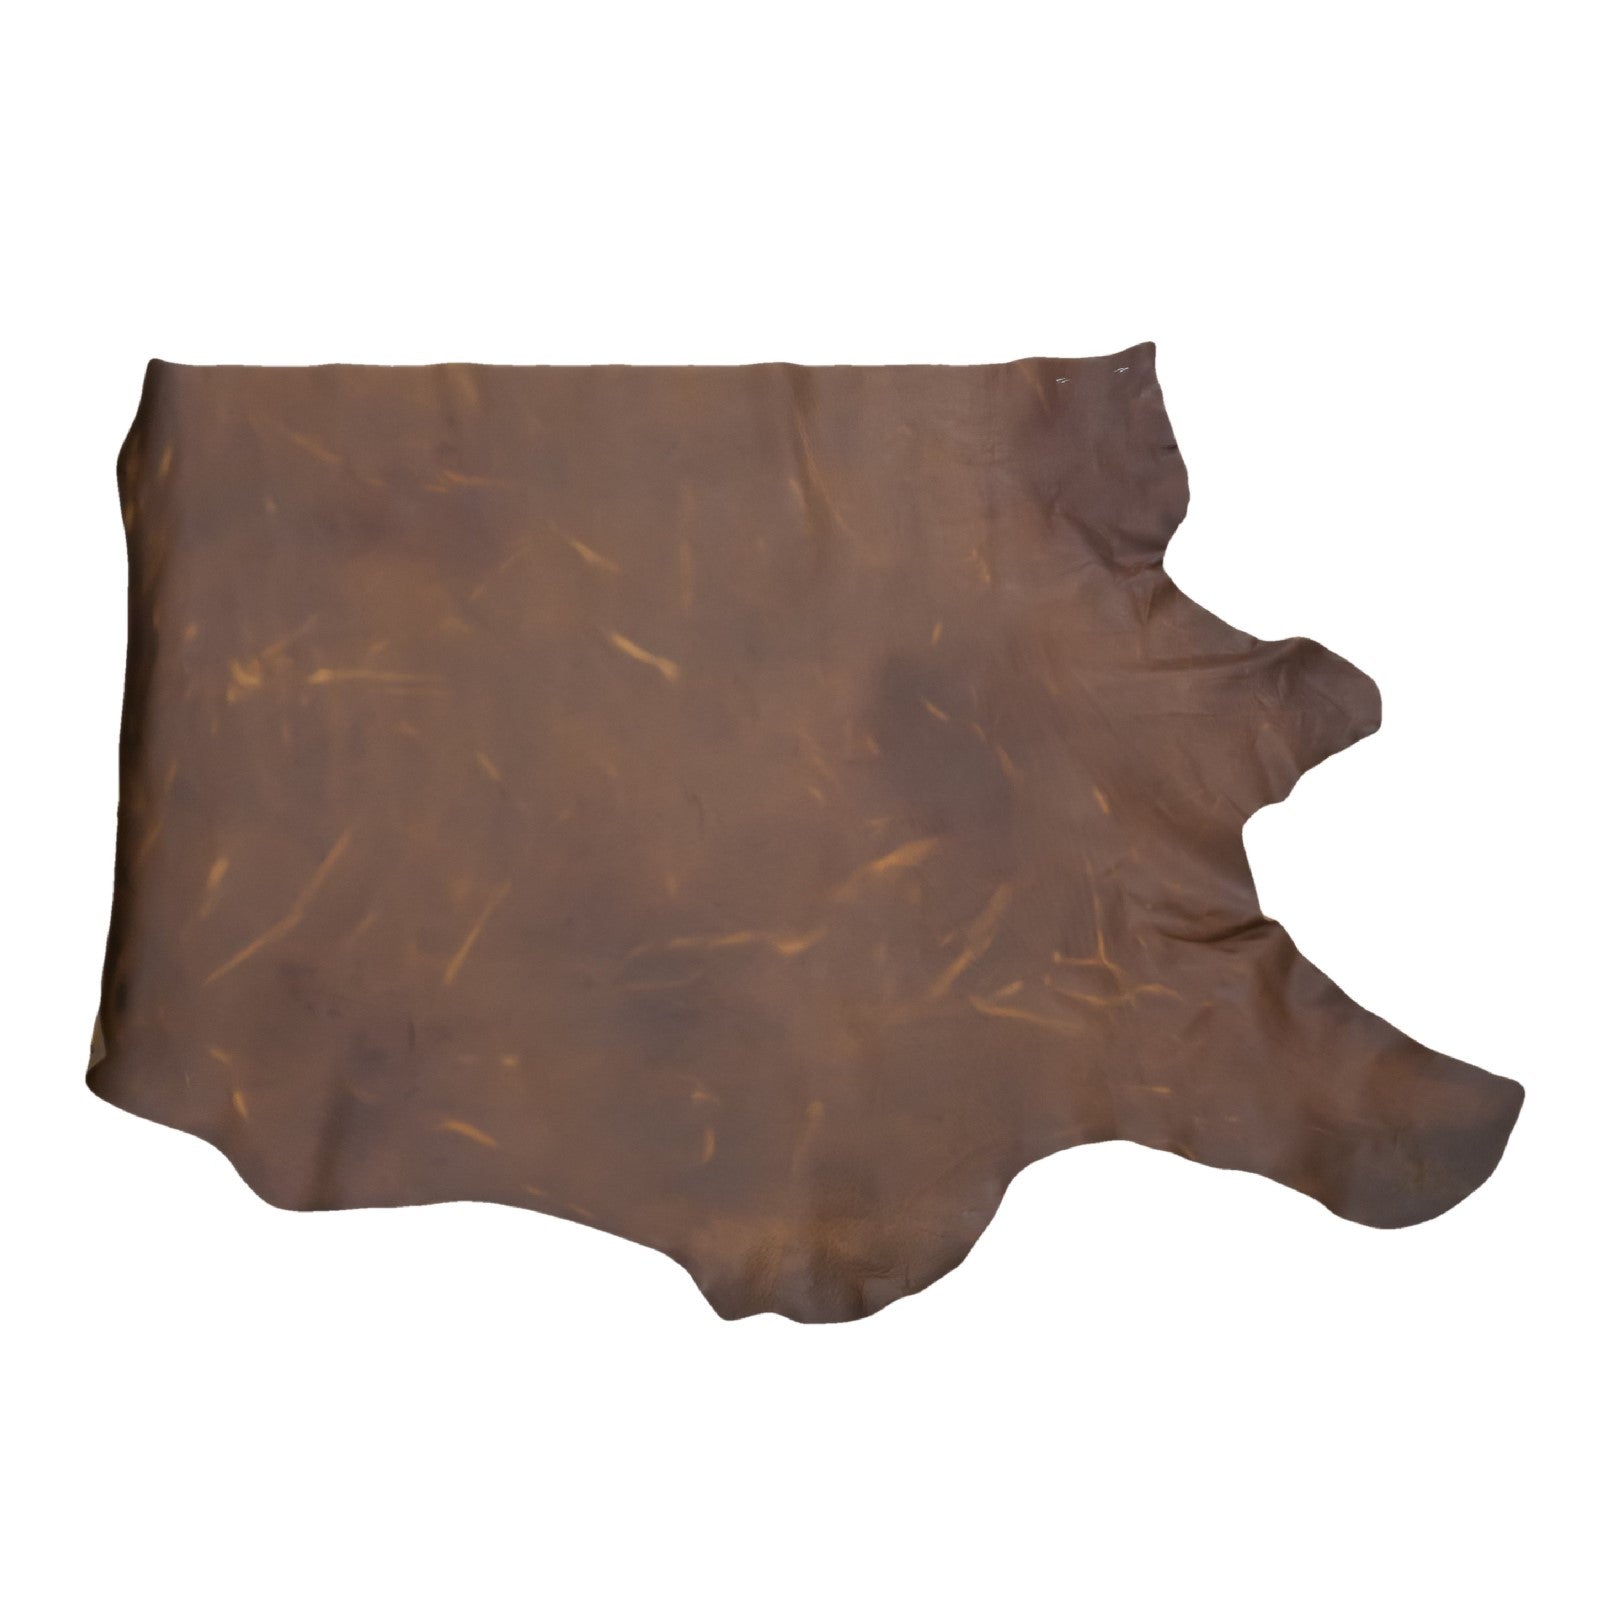 Himalaya Mt Brown, Chap Cow Sides, Highland Ridge, Bottom Piece / 6.5-7.5 | The Leather Guy